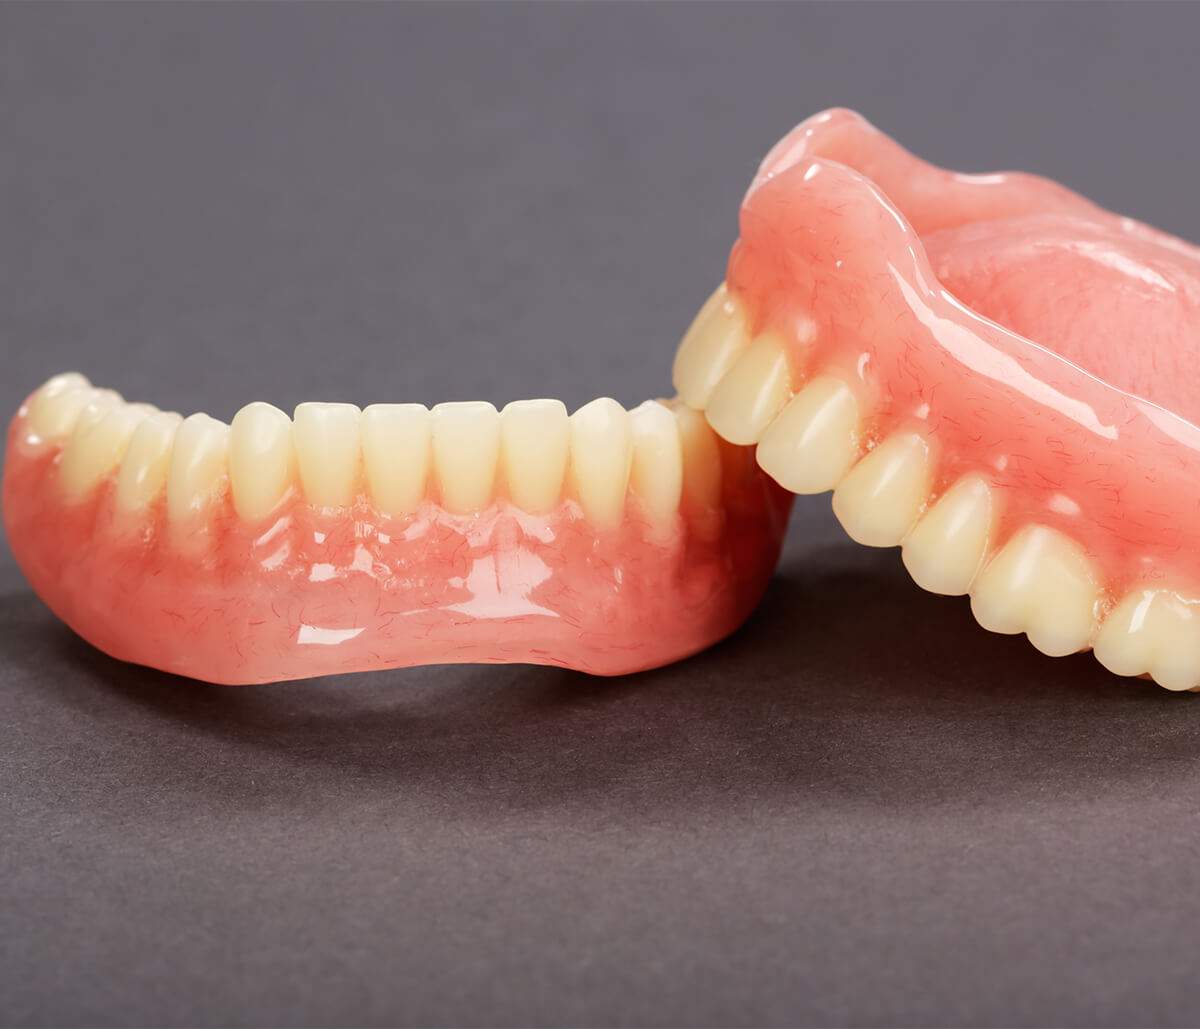 Quality Dentures in Mountain View Area